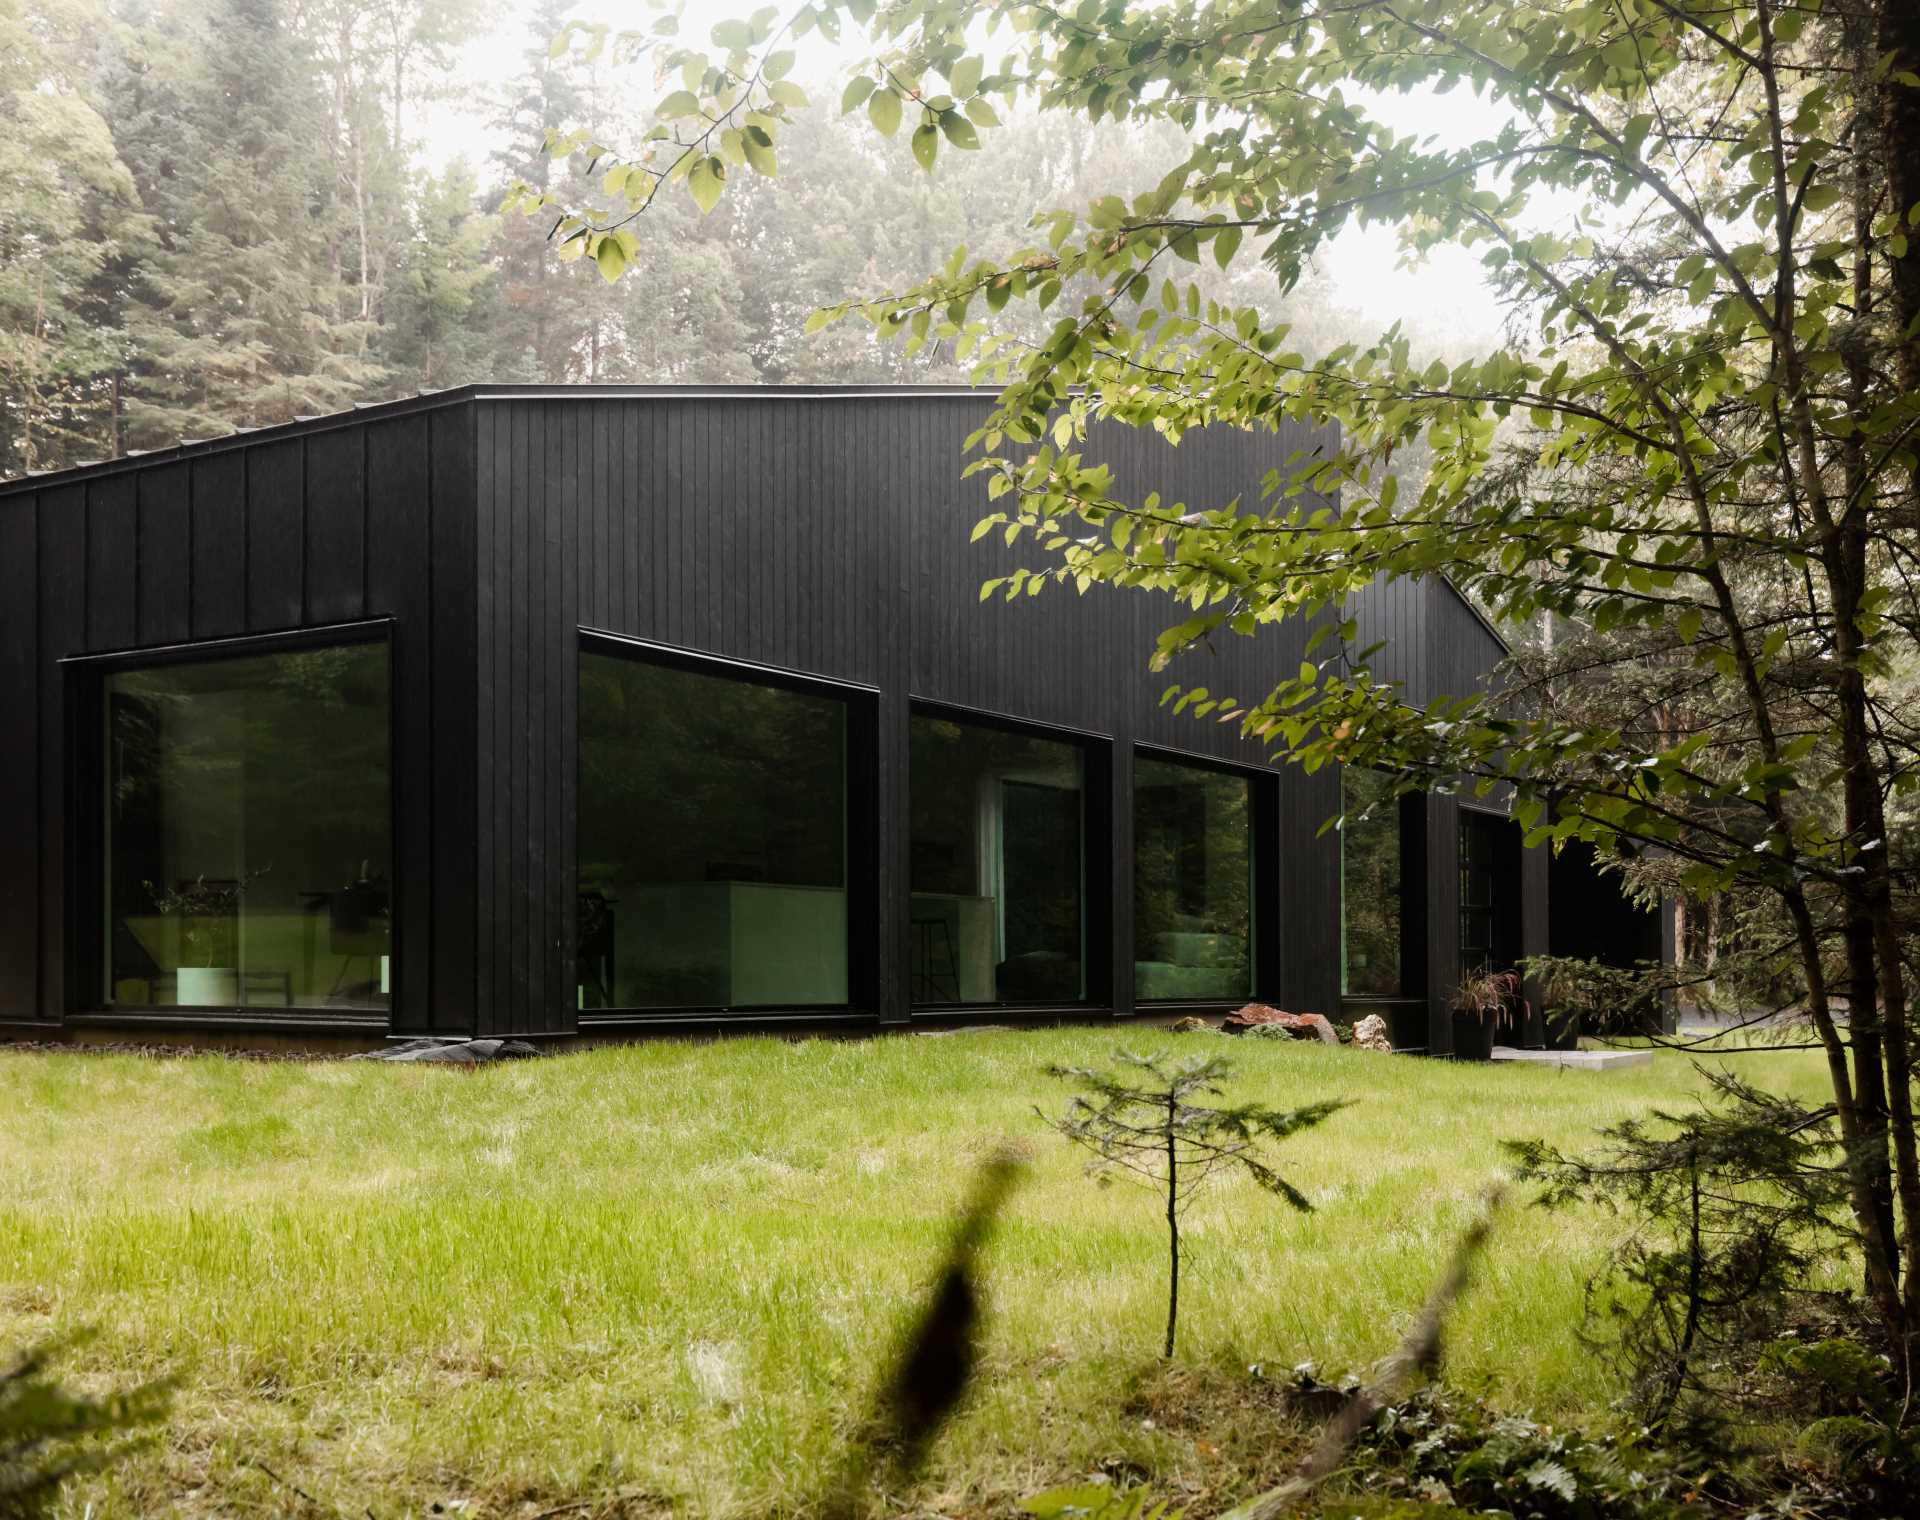 This modern home has a black wood exterior, with black window frames providing consistency to the design.